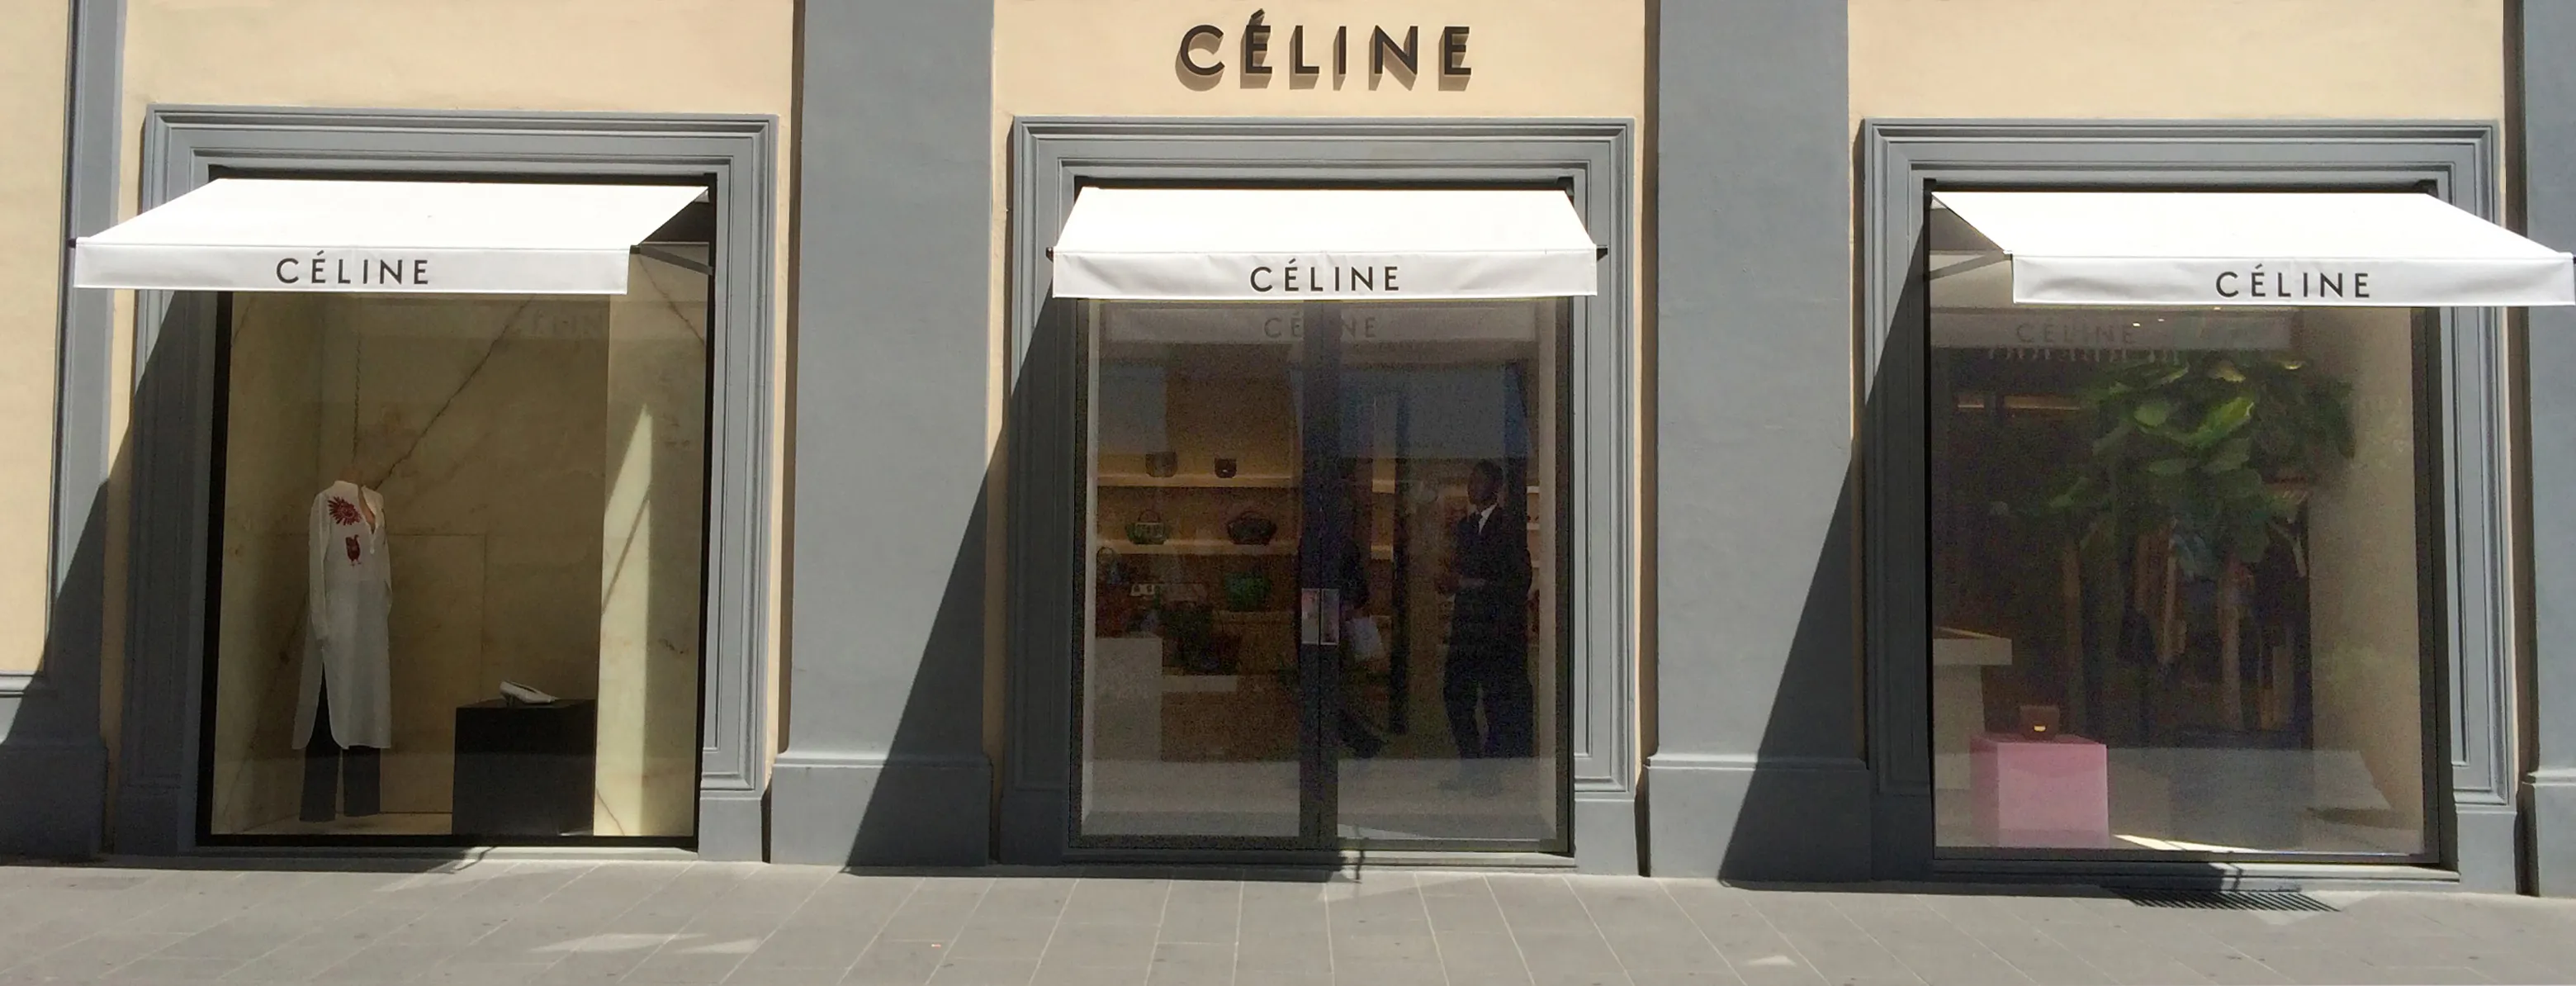 Celine in Italy, europe | Clothes - Country Helper